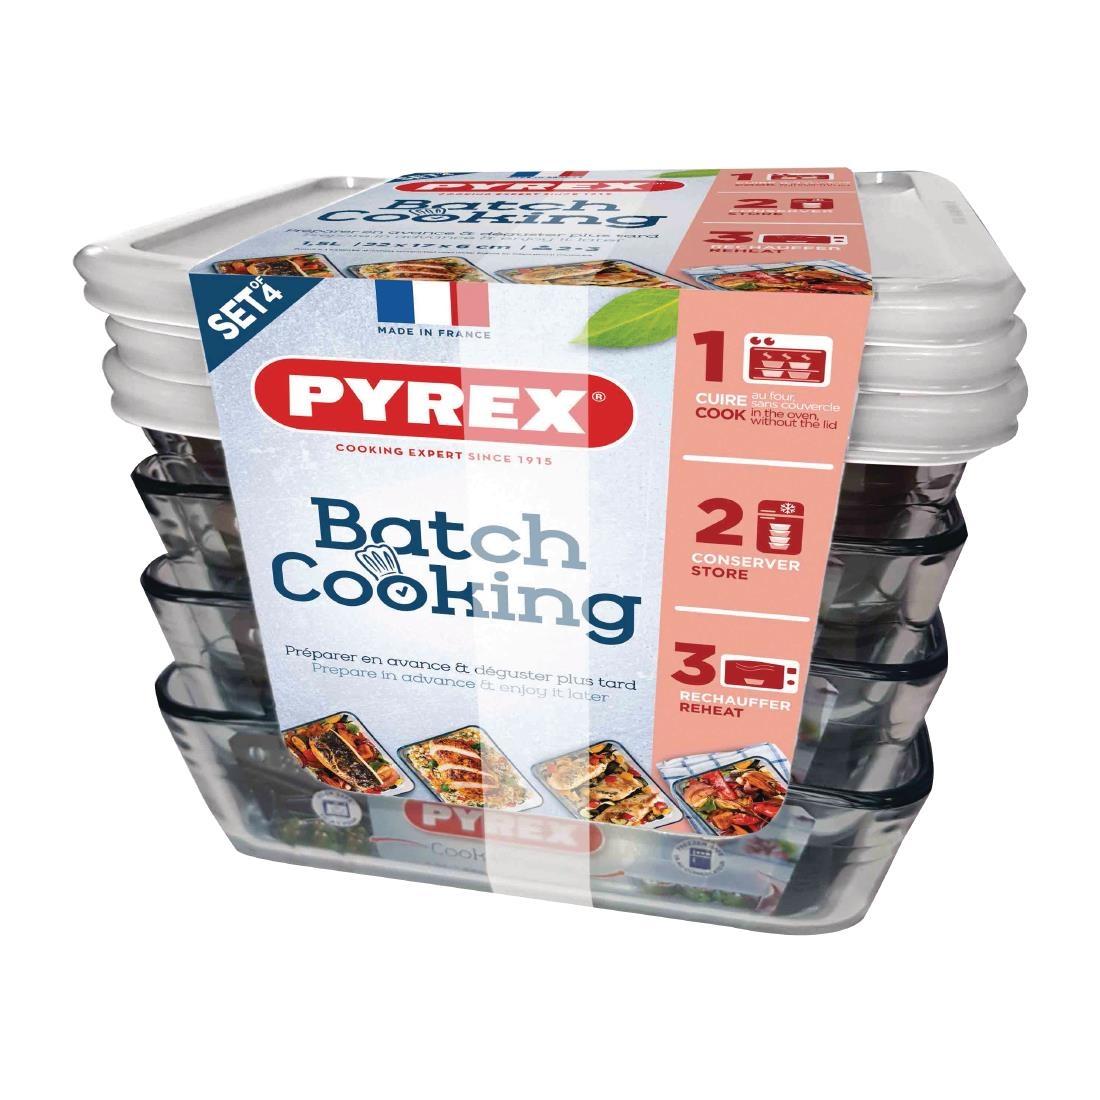 Pyrex Batch Cooking Cook & Freeze Food Storage Glass Containers Set Of 4 1.5 Ltr - FS360  - 2